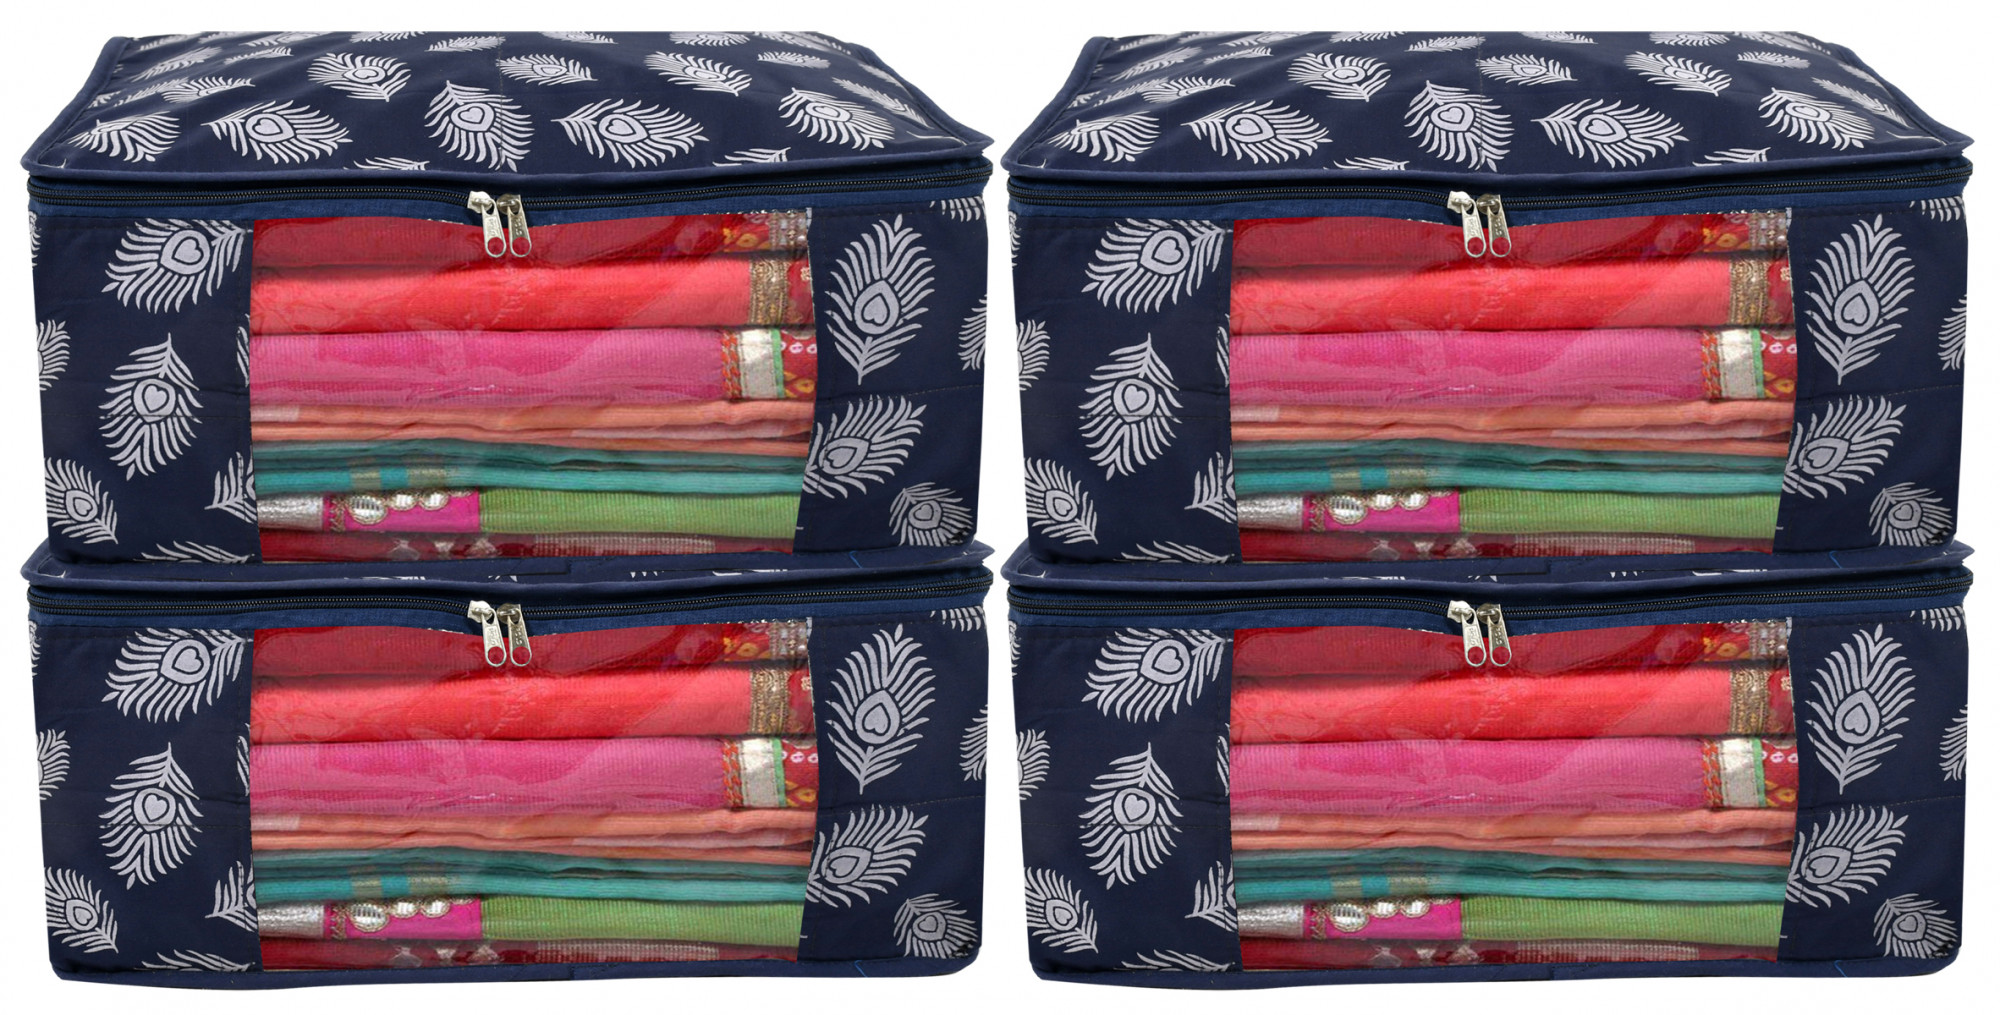 Kuber Industries Leaf Printed Saree Cover/Clothes Organiser For Wardrobe With Transparent Window,(Navy Blue)